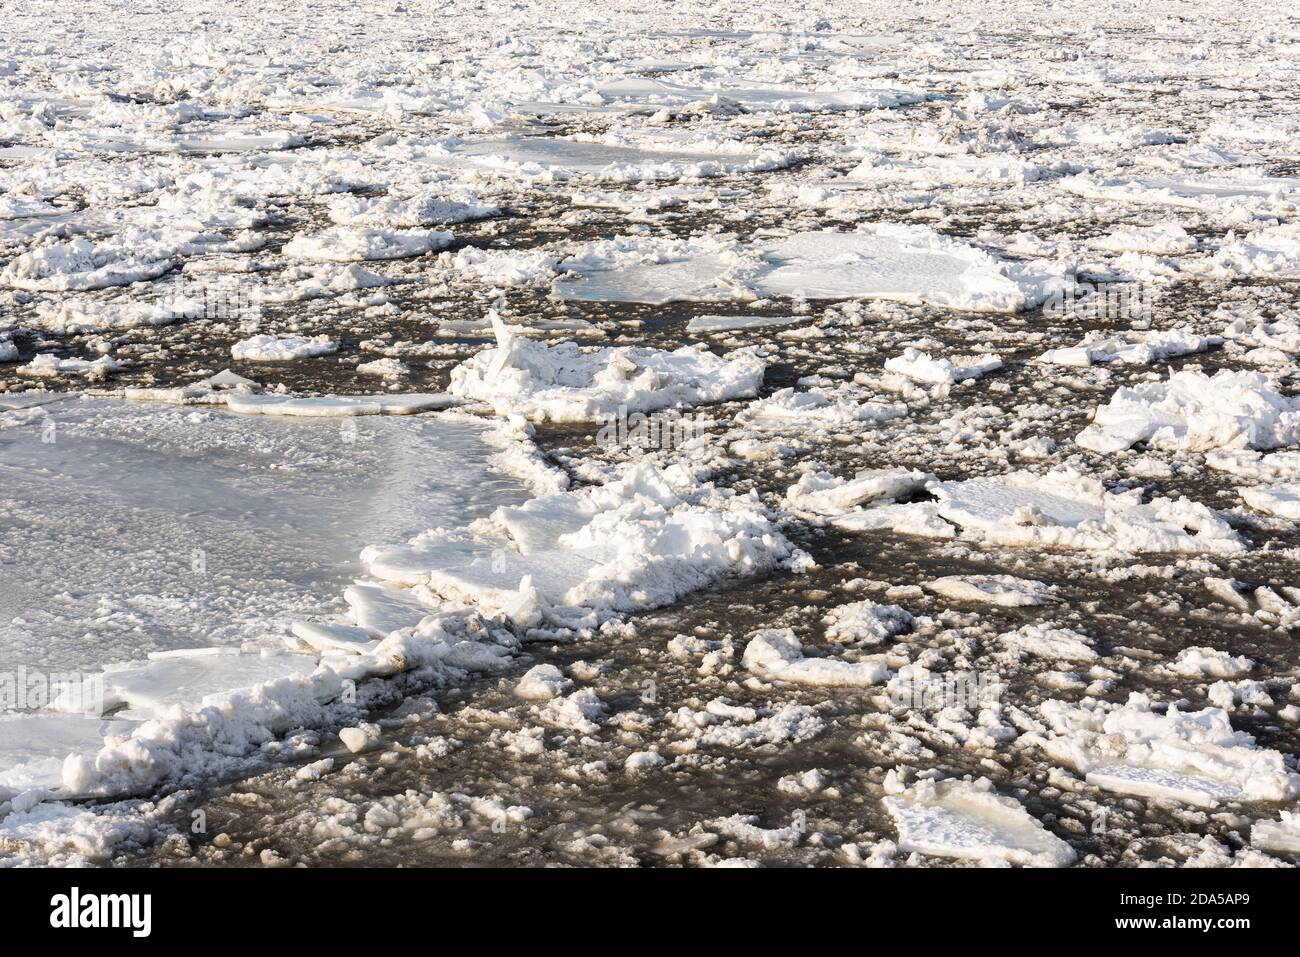 Ice on the Saint-Lawrence river, Rivière-Ouelle, Quebec, Canada. Stock Photo